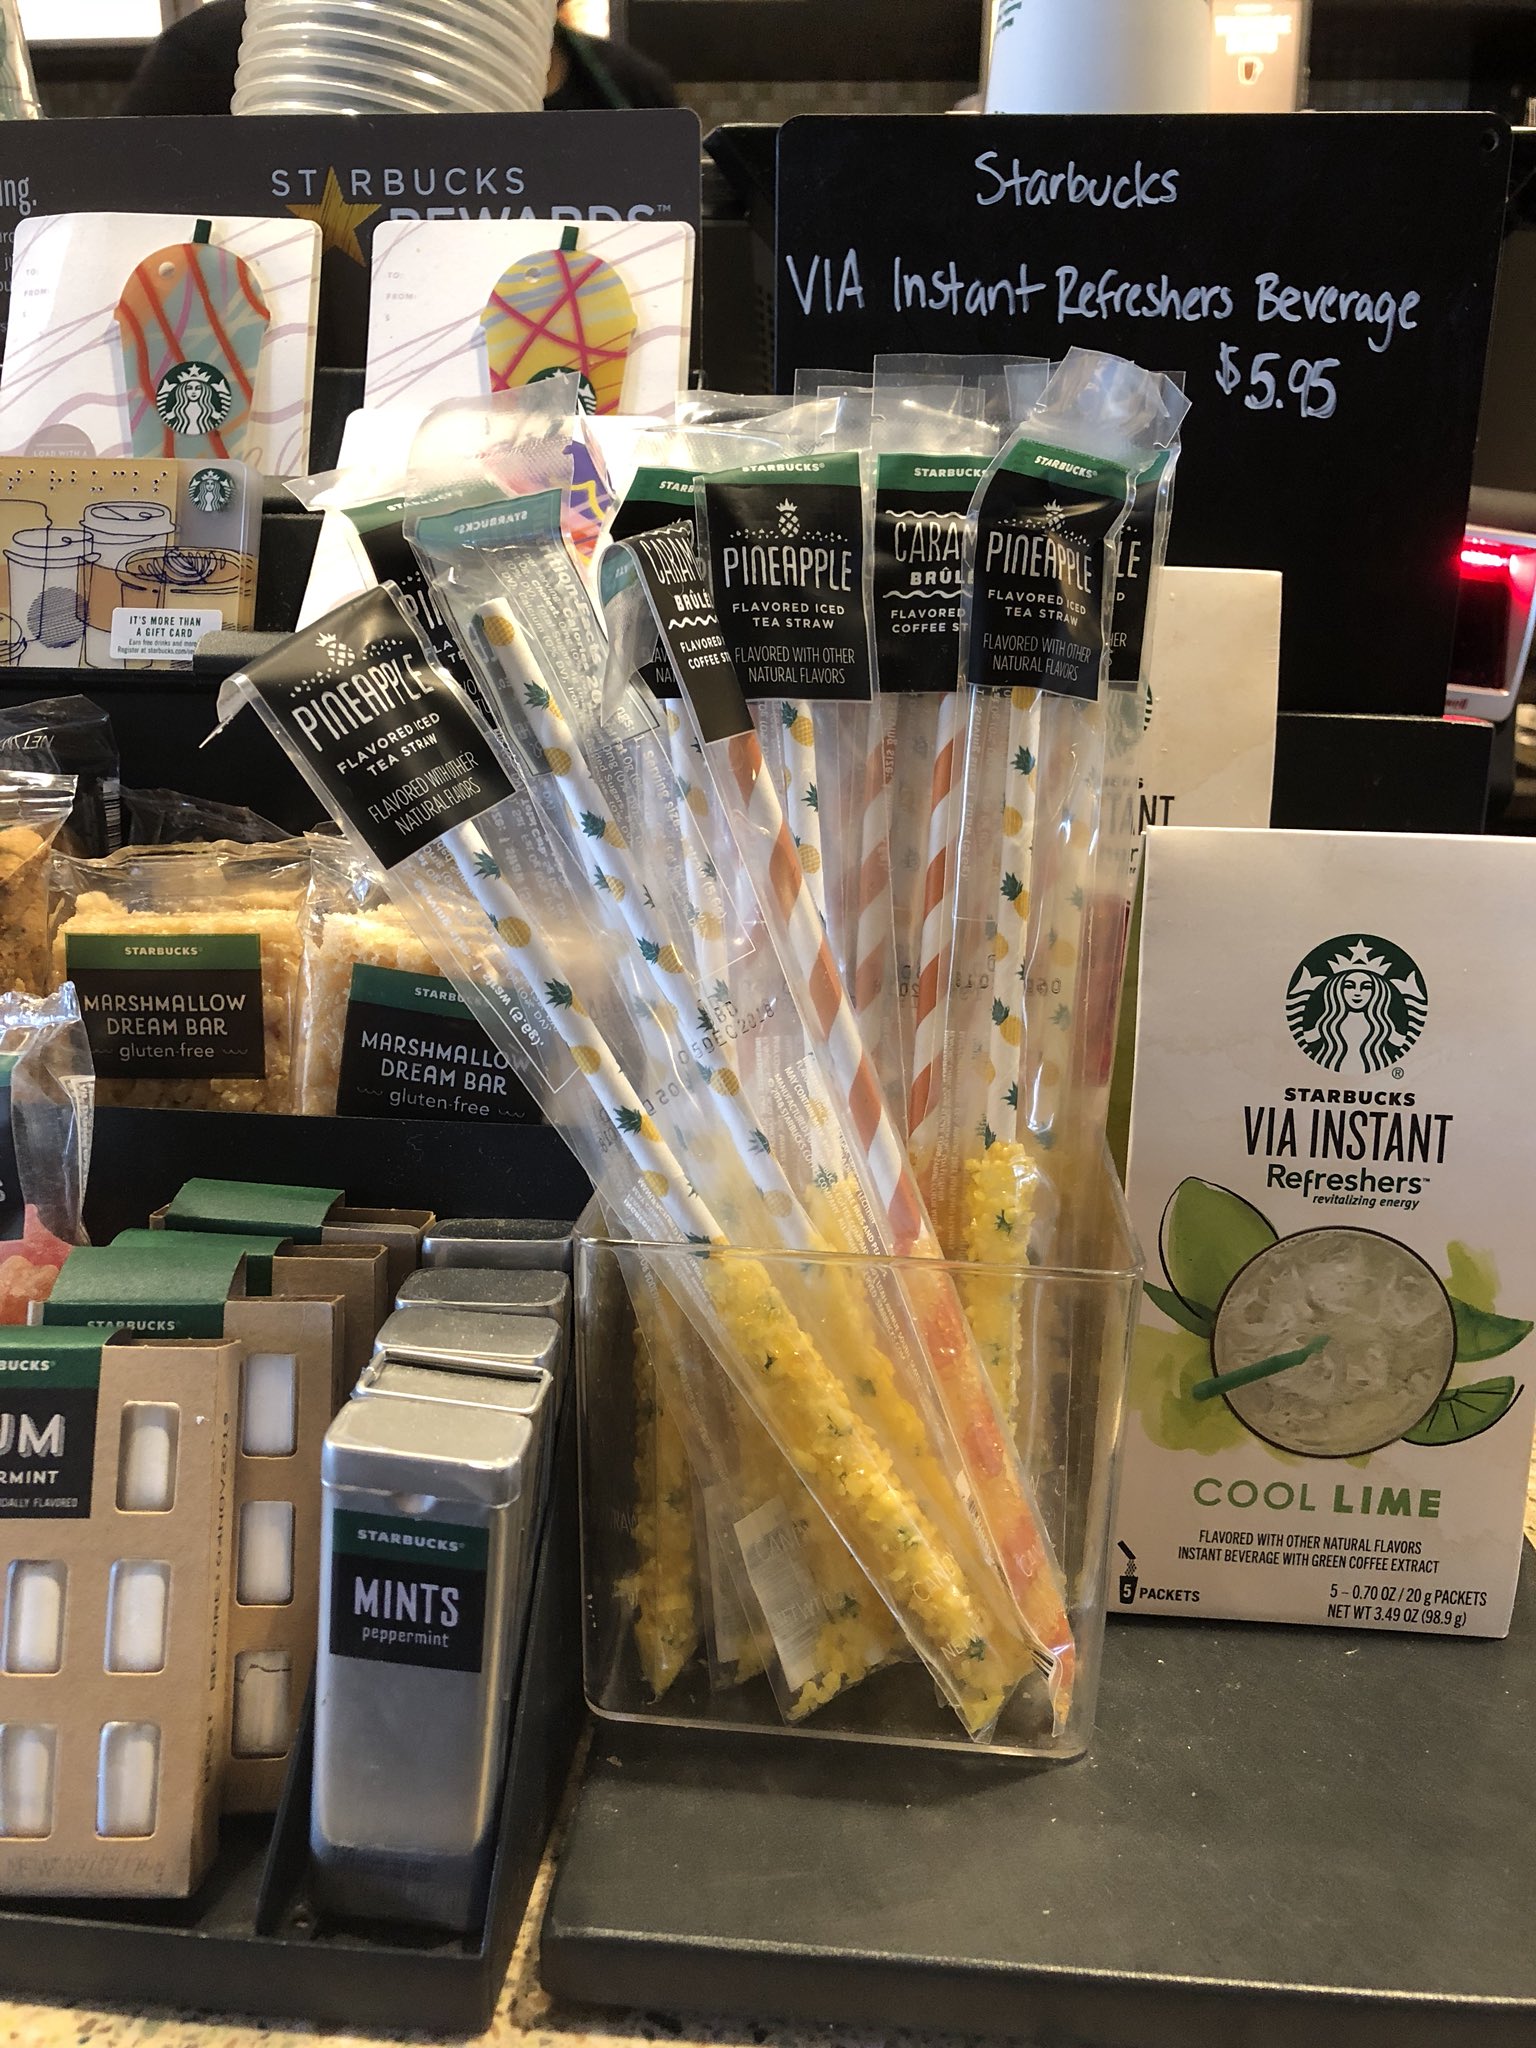 Emily Ladau on X: Oh okay @Starbucksplastic straws are wasteful and  harmful to the environment but wrapping gimmicky paper straws in plastic  for individual sale is totally fine? Got it. 🤔🙄  /